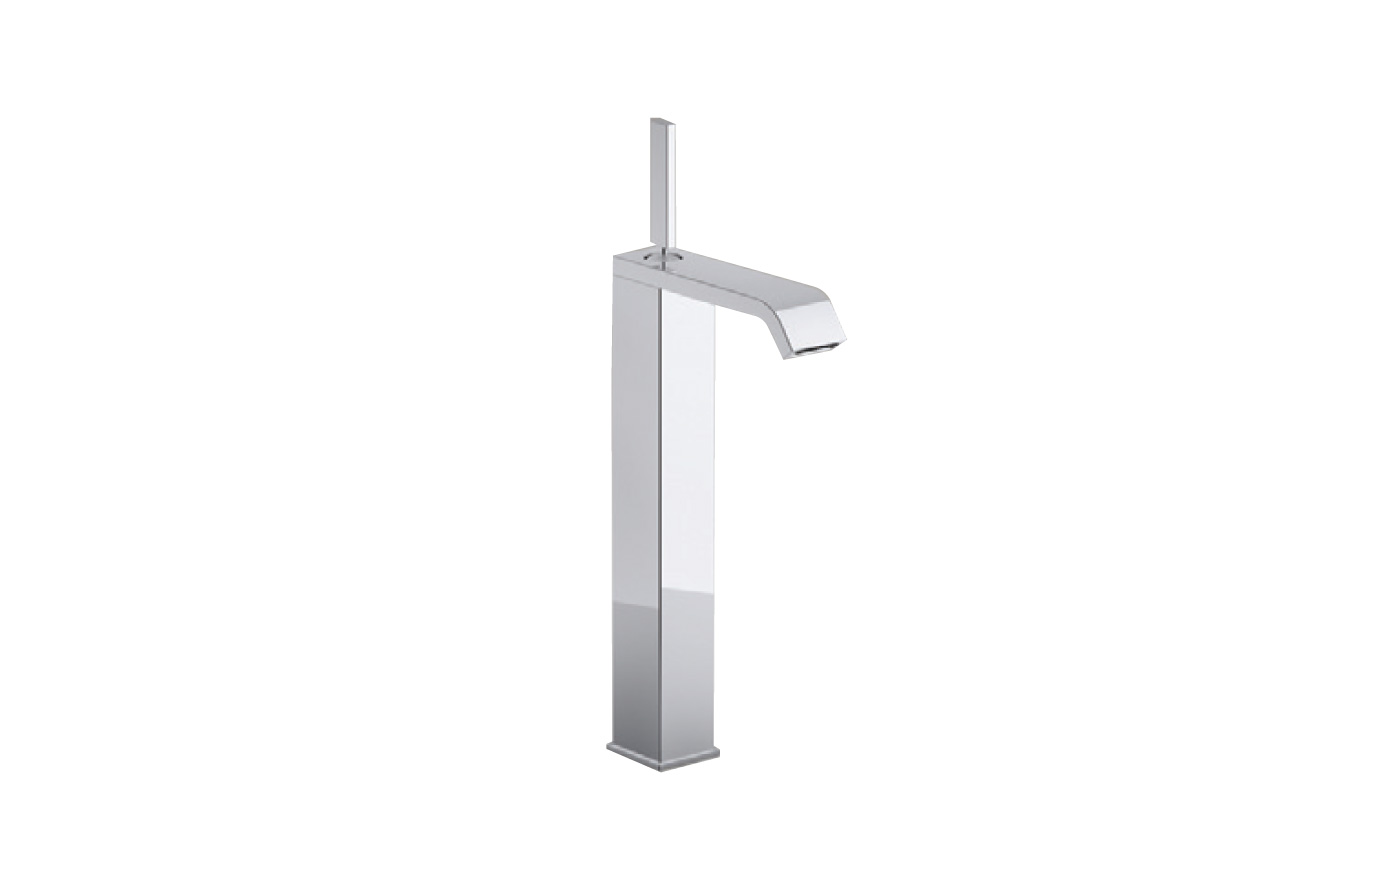 Modern-looking bathroom faucet in chrome finishing